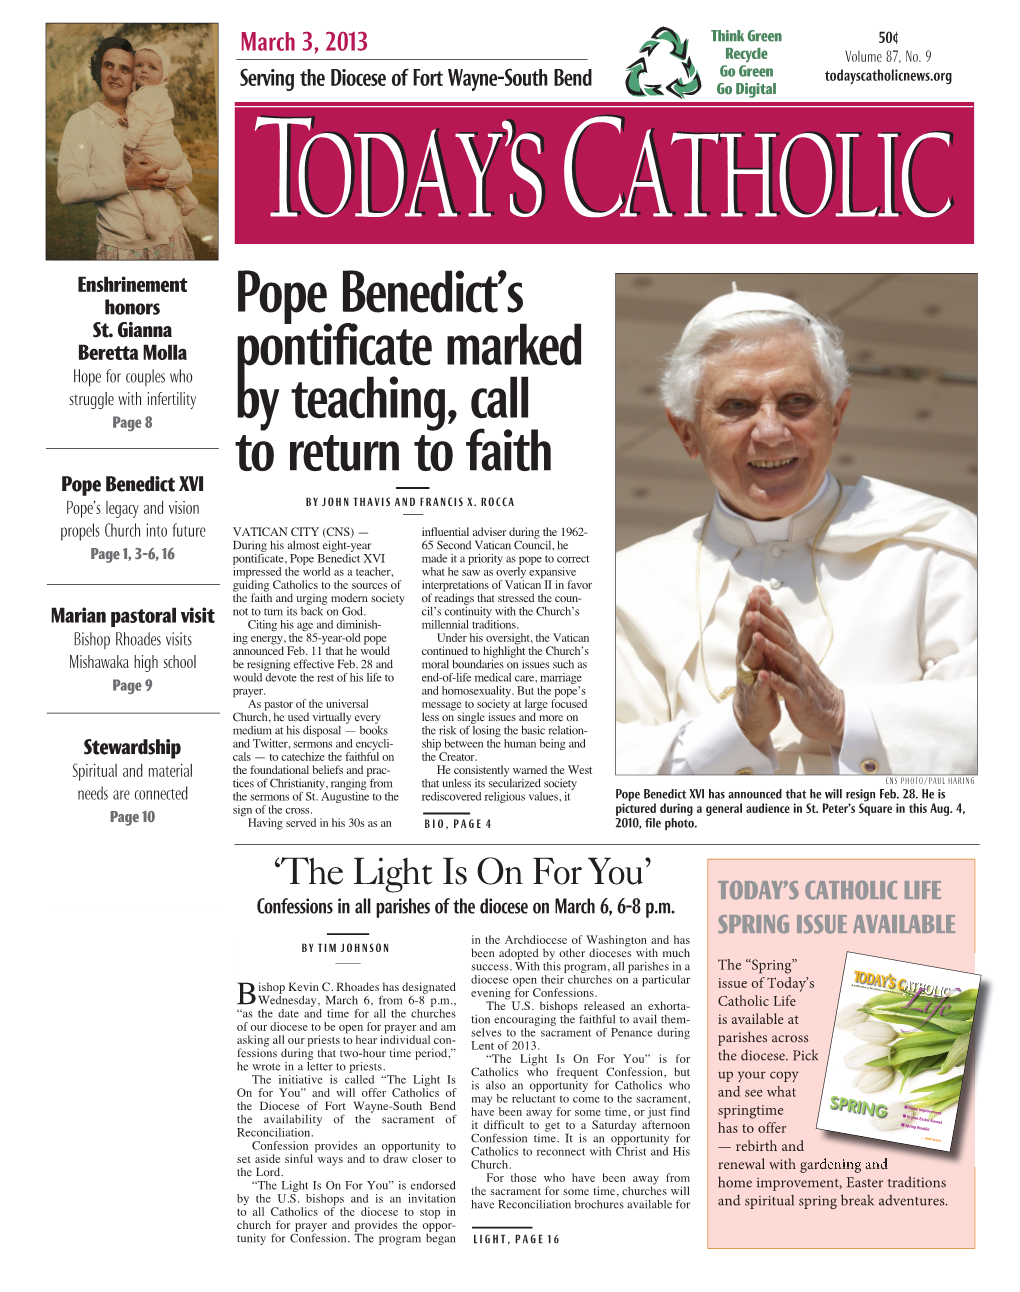 Pope Benedict's Pontificate Marked by Teaching, Call to Return to Faith